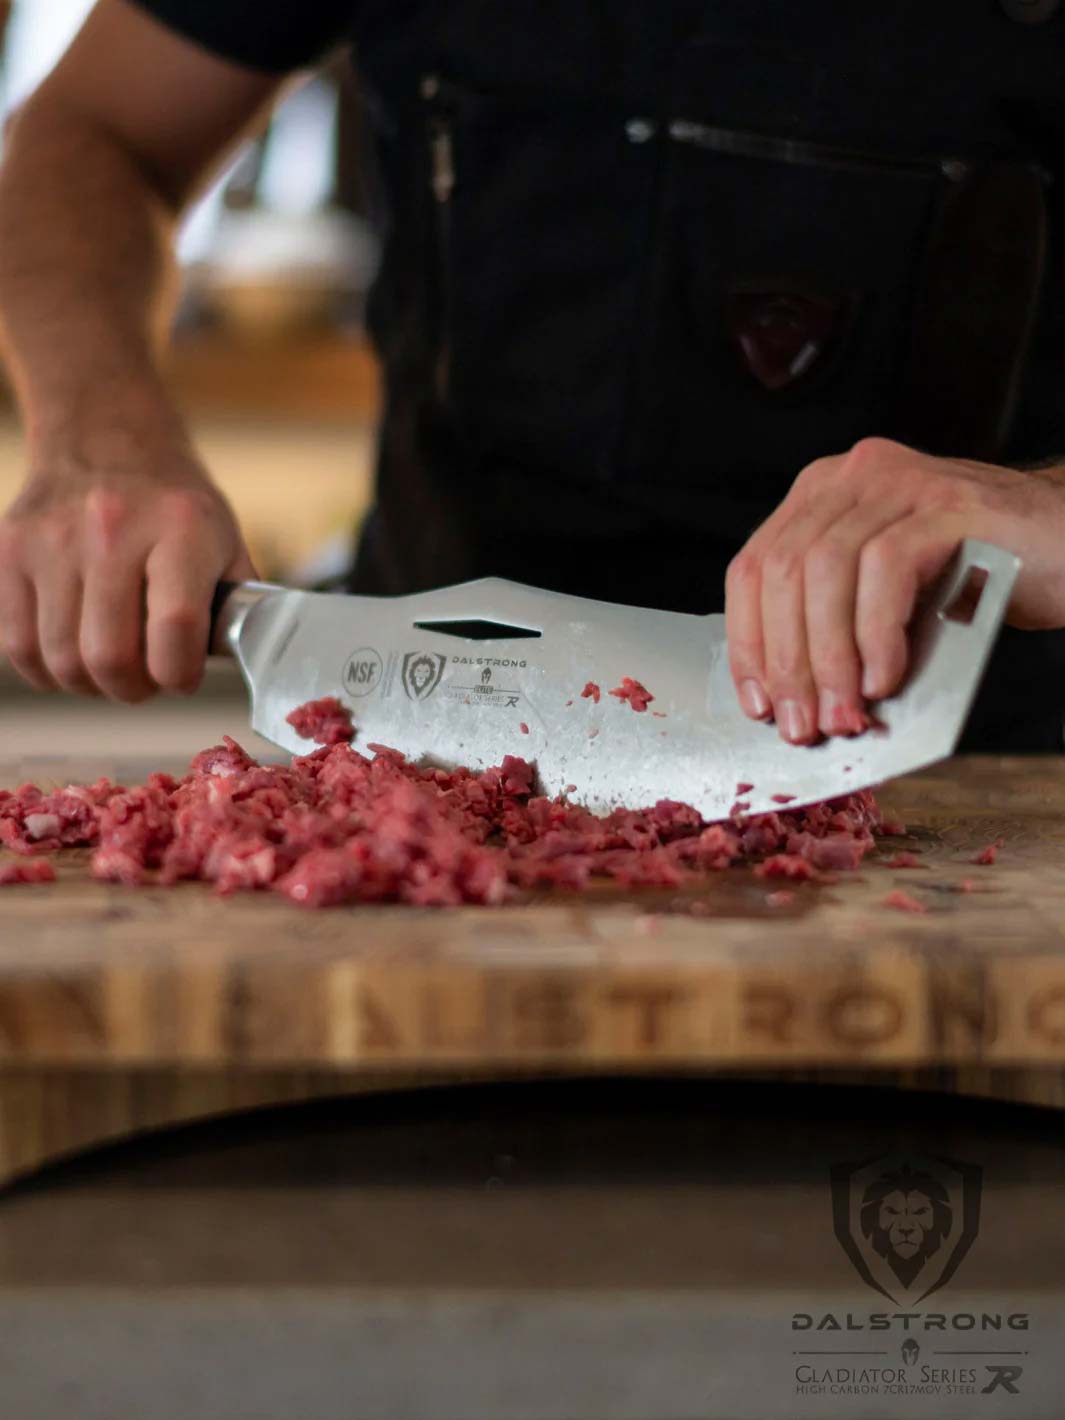 Dalstrong gladiator series 12 inch rocking cleaver knife chopping meat on a cutting board.